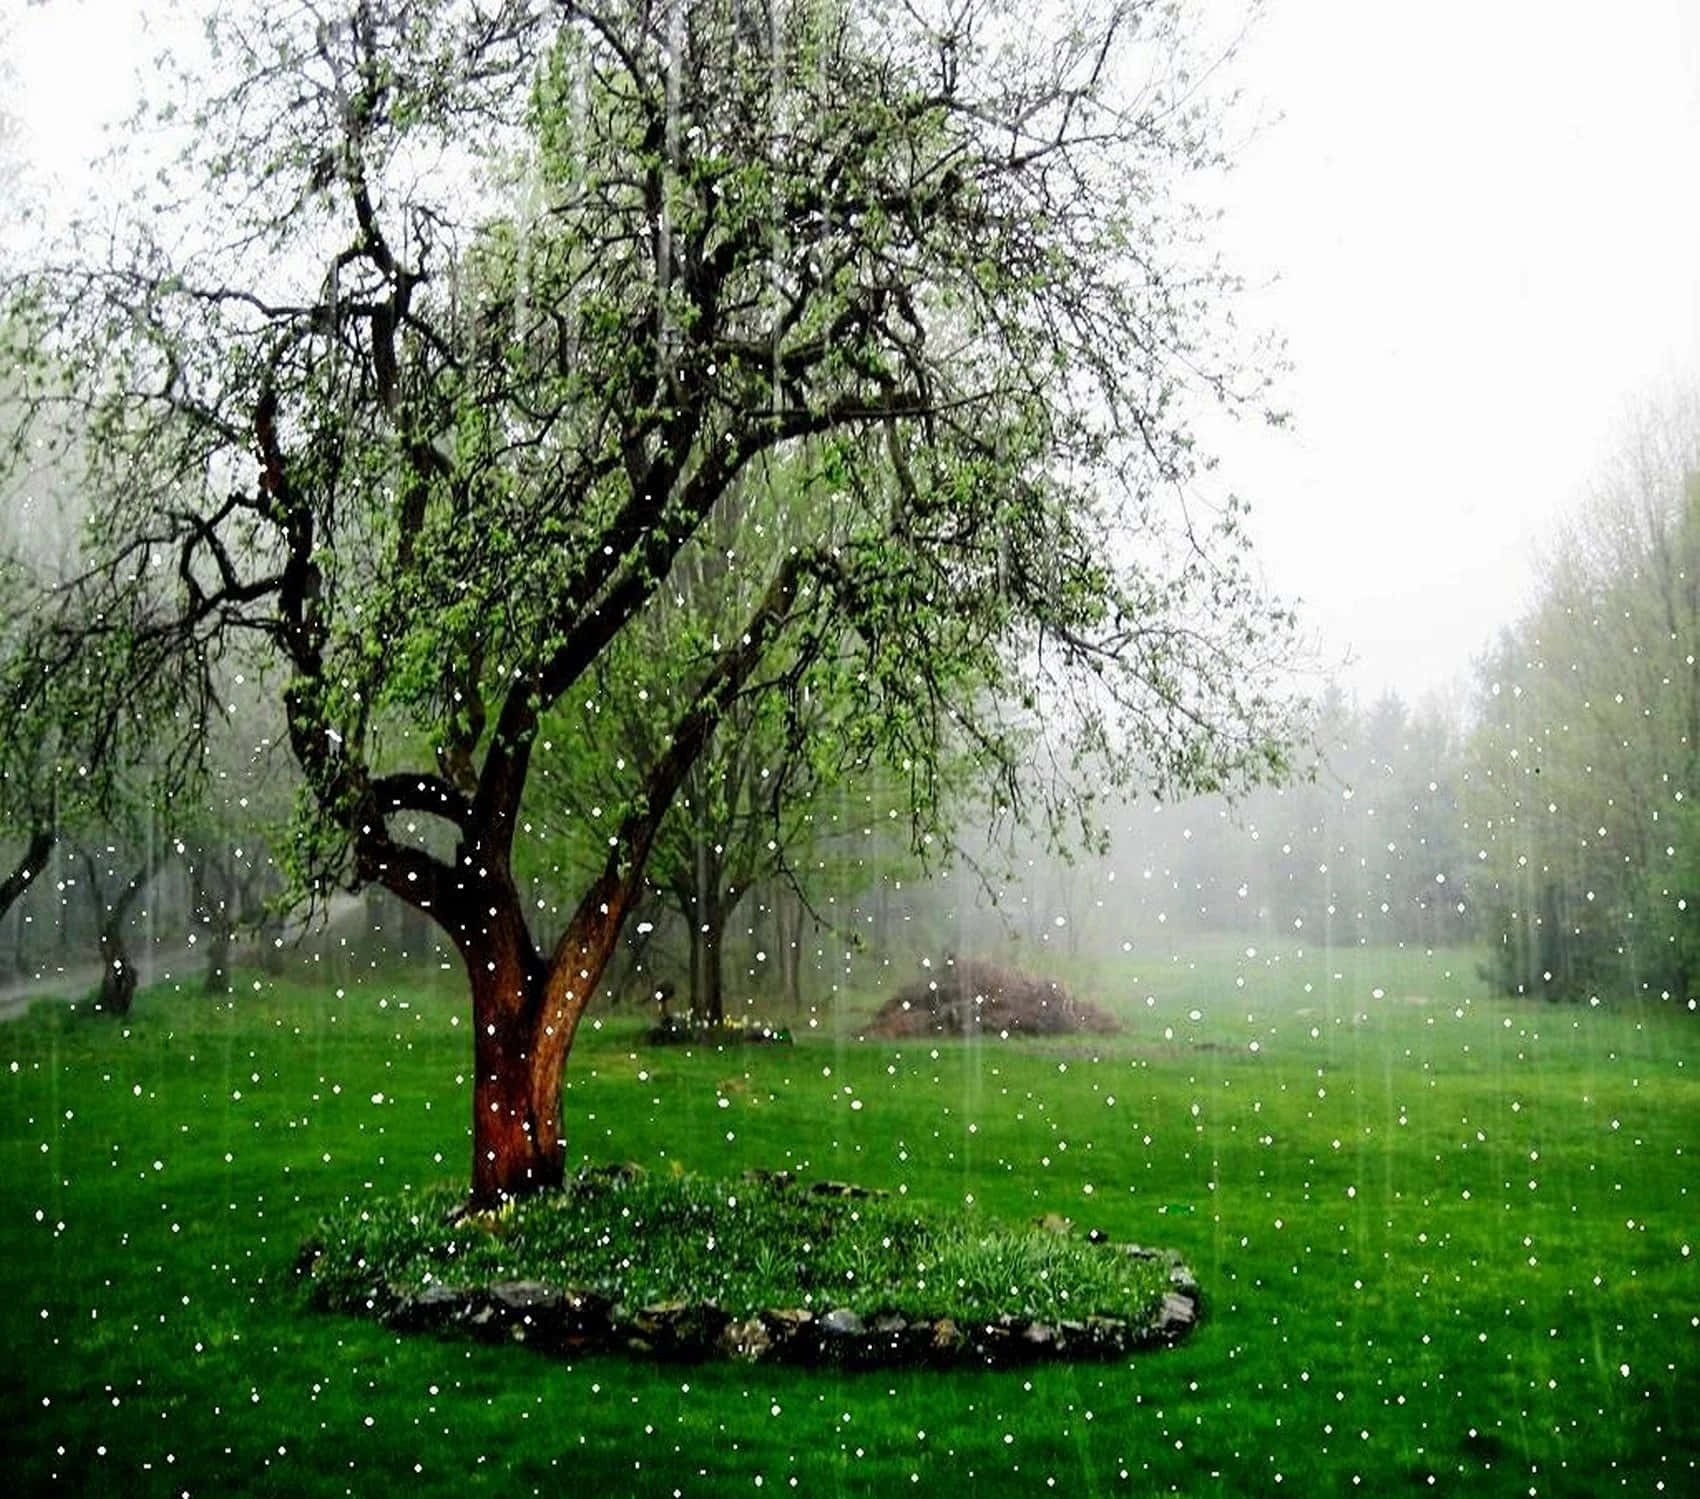 Brighten up your day with a refreshing shower of rain.